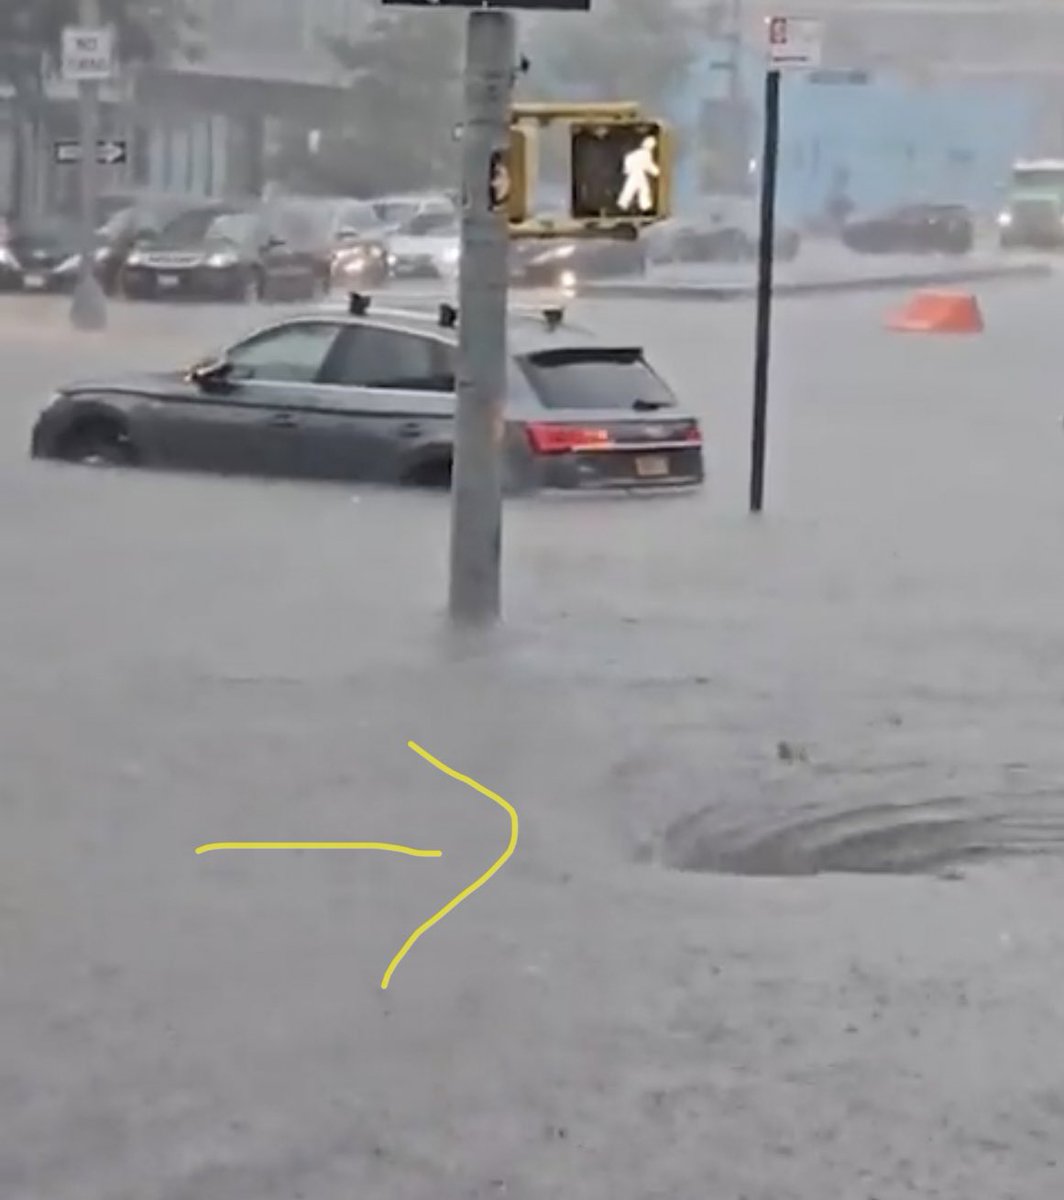 @luckytran Walking in flooded streets is so dangerous, manhole covers get displaced, storm drains can suck you in.